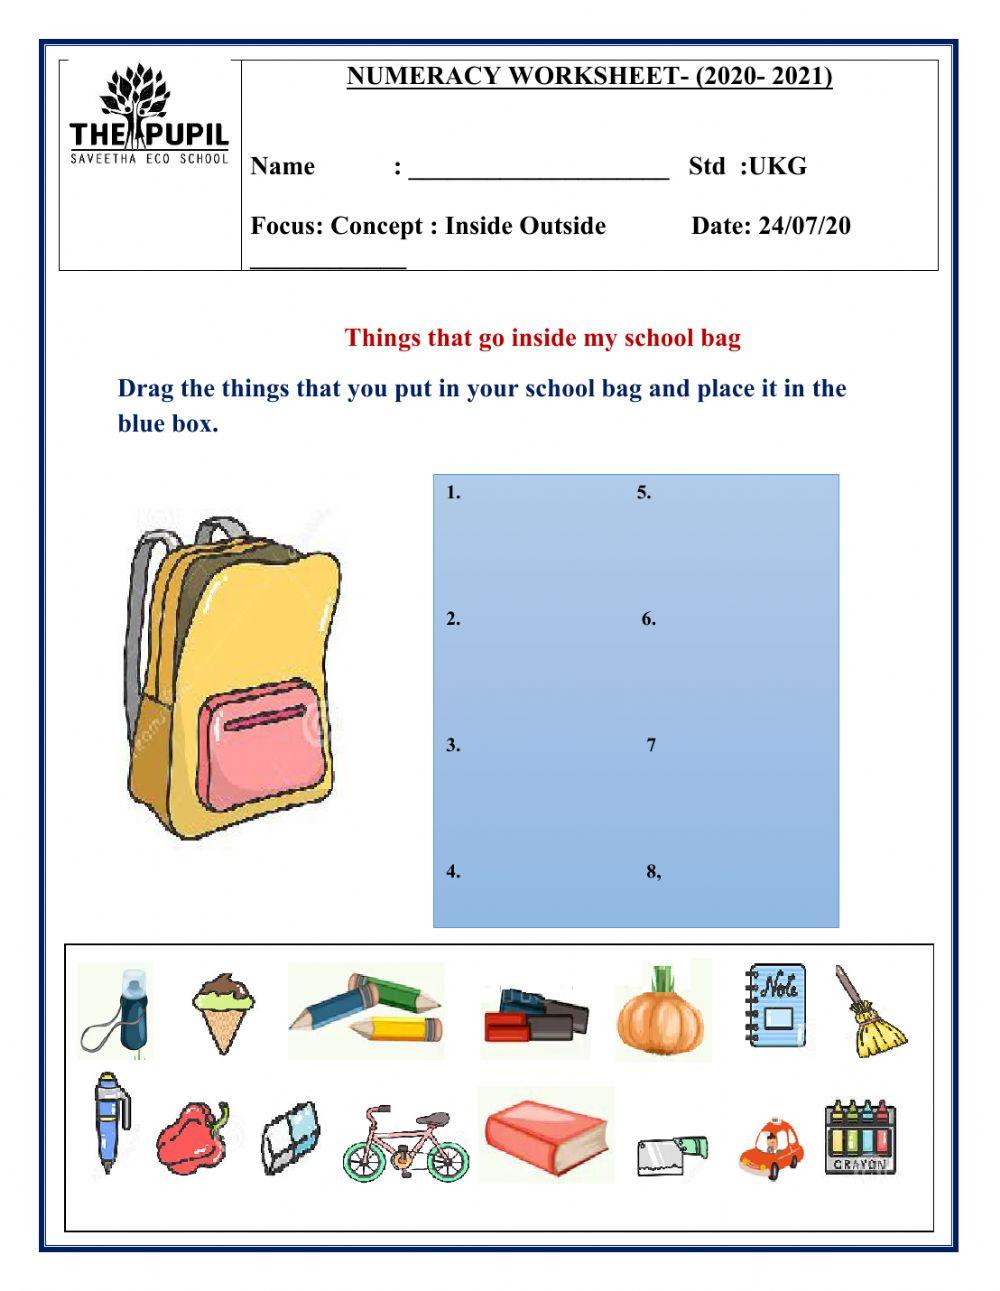 Things that go inside the school bag